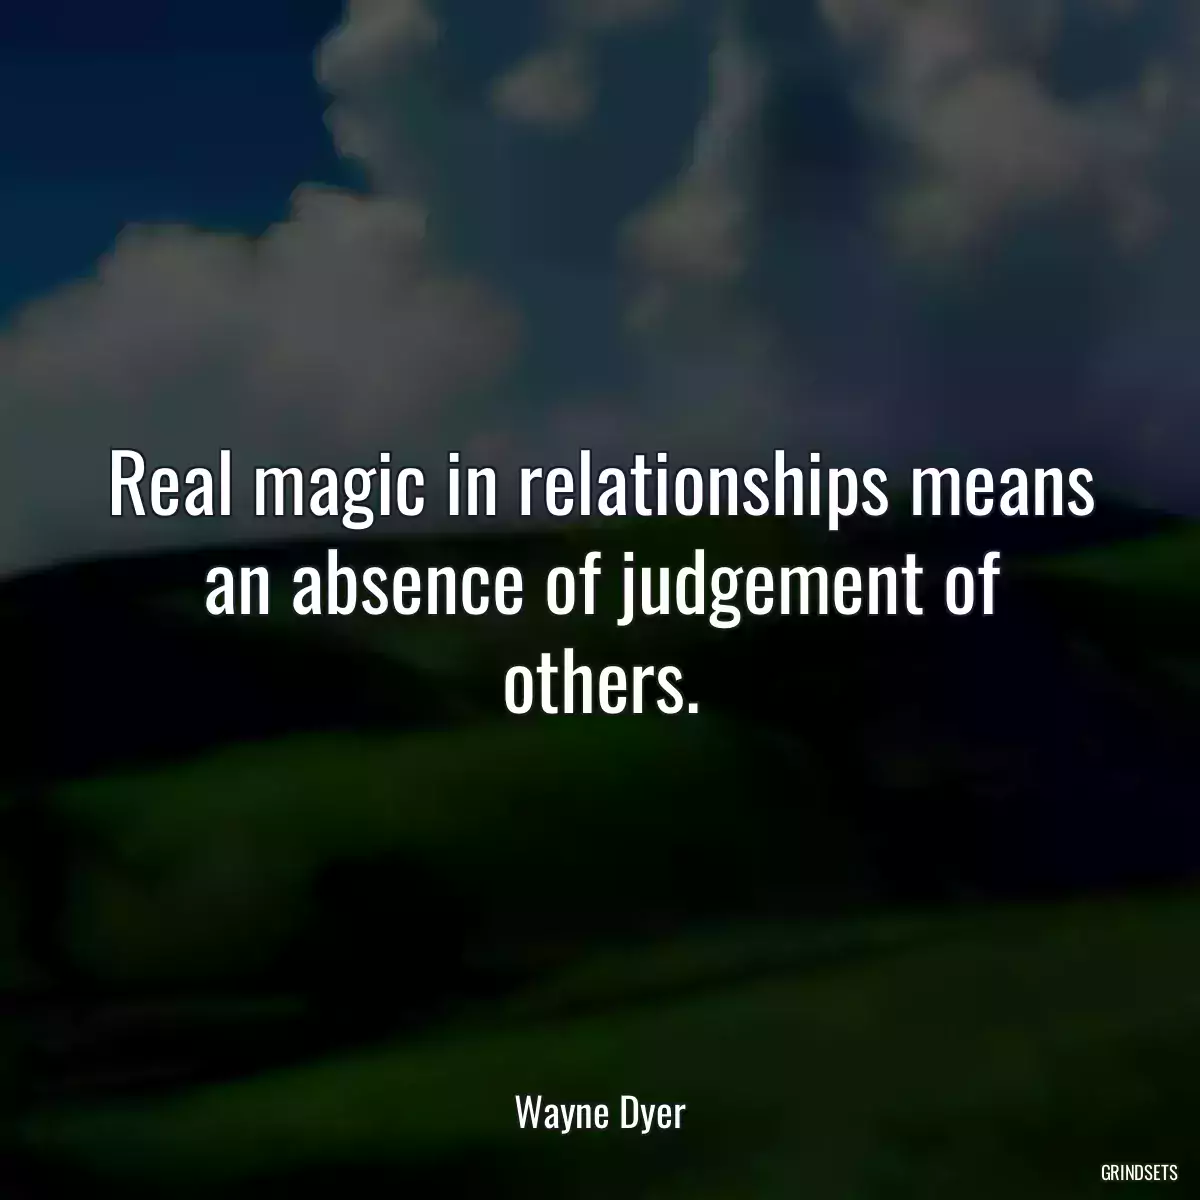 Real magic in relationships means an absence of judgement of others.